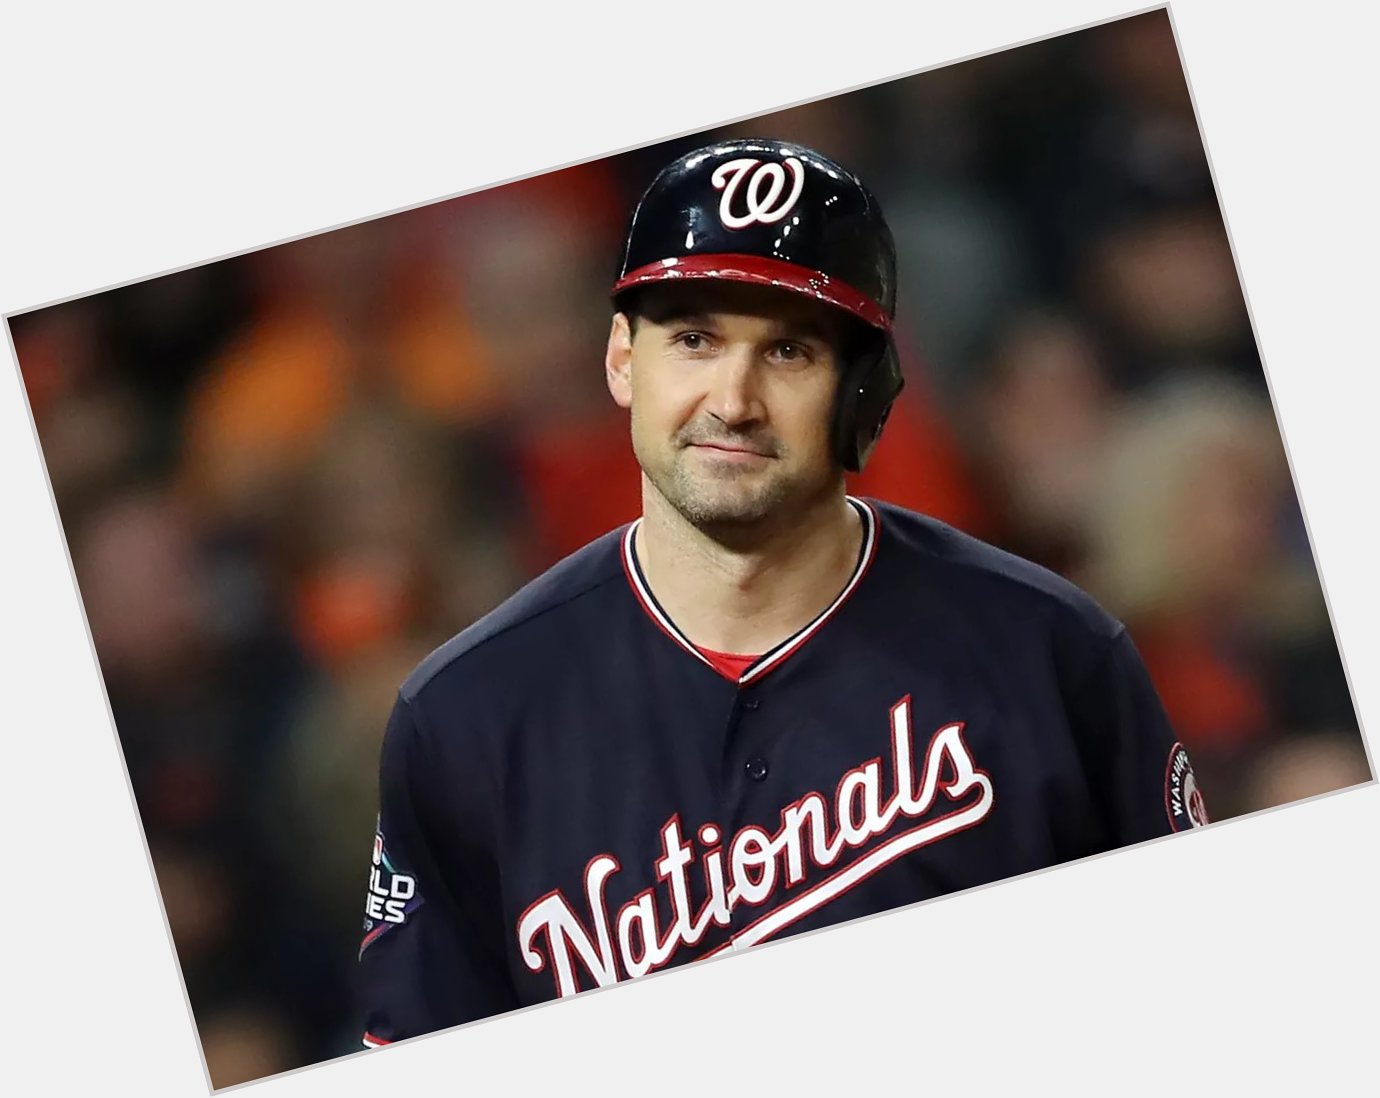 Happy birthday to Ryan Zimmerman, who was in Washington for all the bad years as well as for the World Series title 